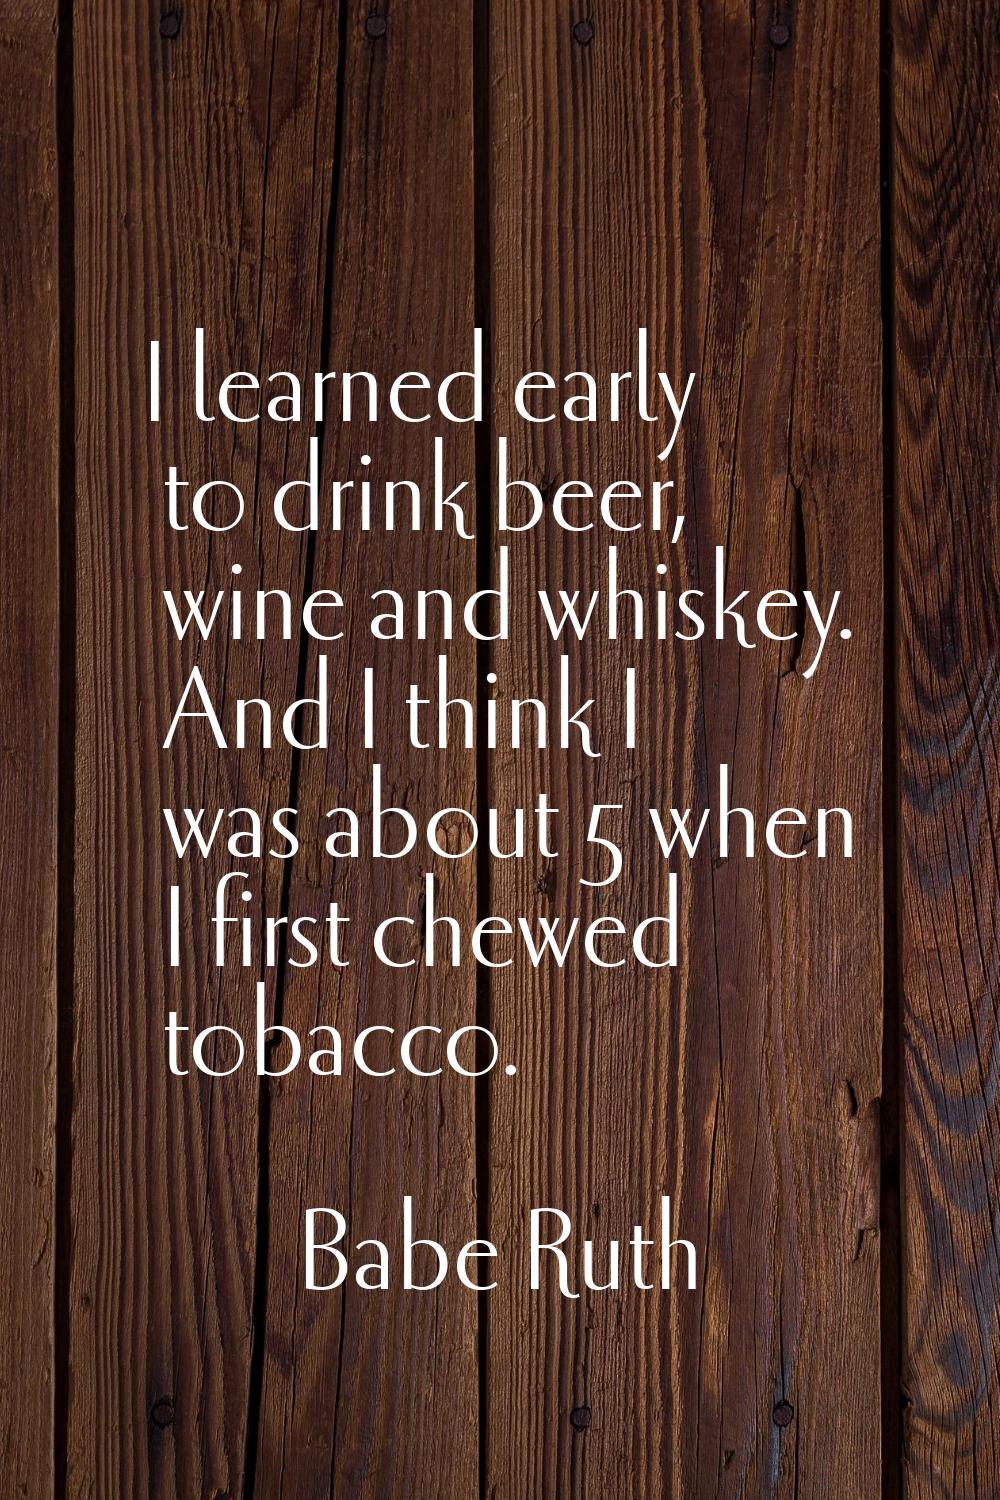 I learned early to drink beer, wine and whiskey. And I think I was about 5 when I first chewed toba